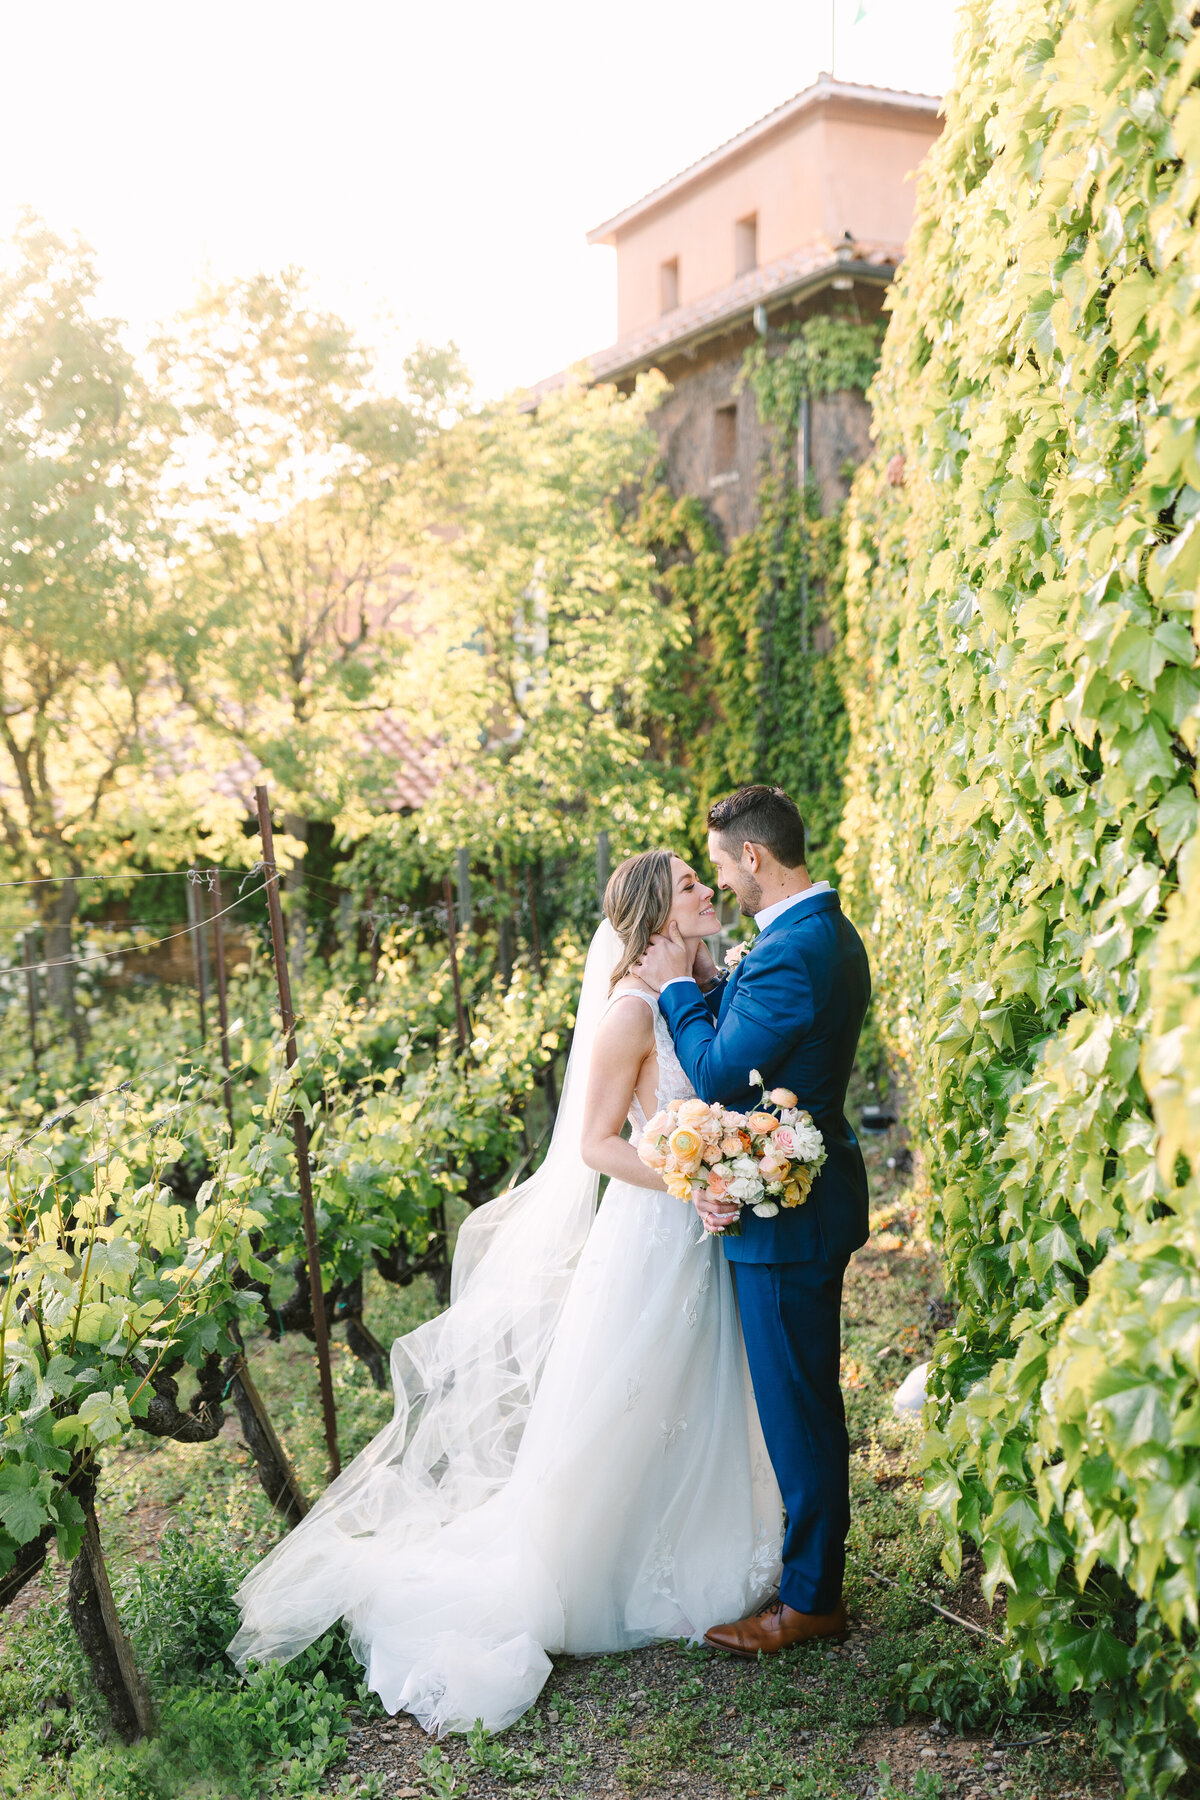 bride and groom embracing in a lush green napa winery.